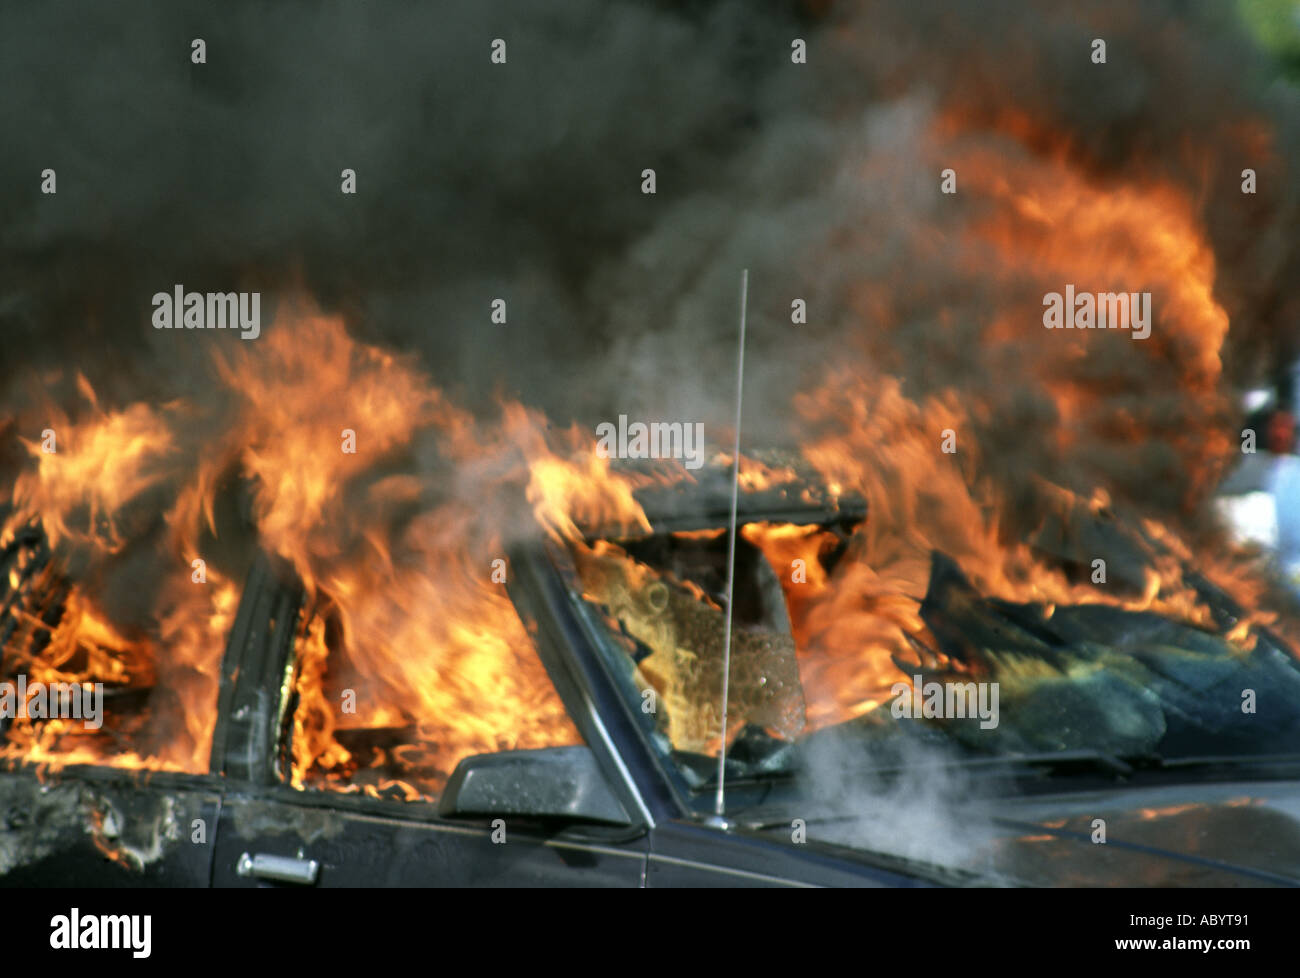 Flames and smoke coming from a car on Fire Stock Photo